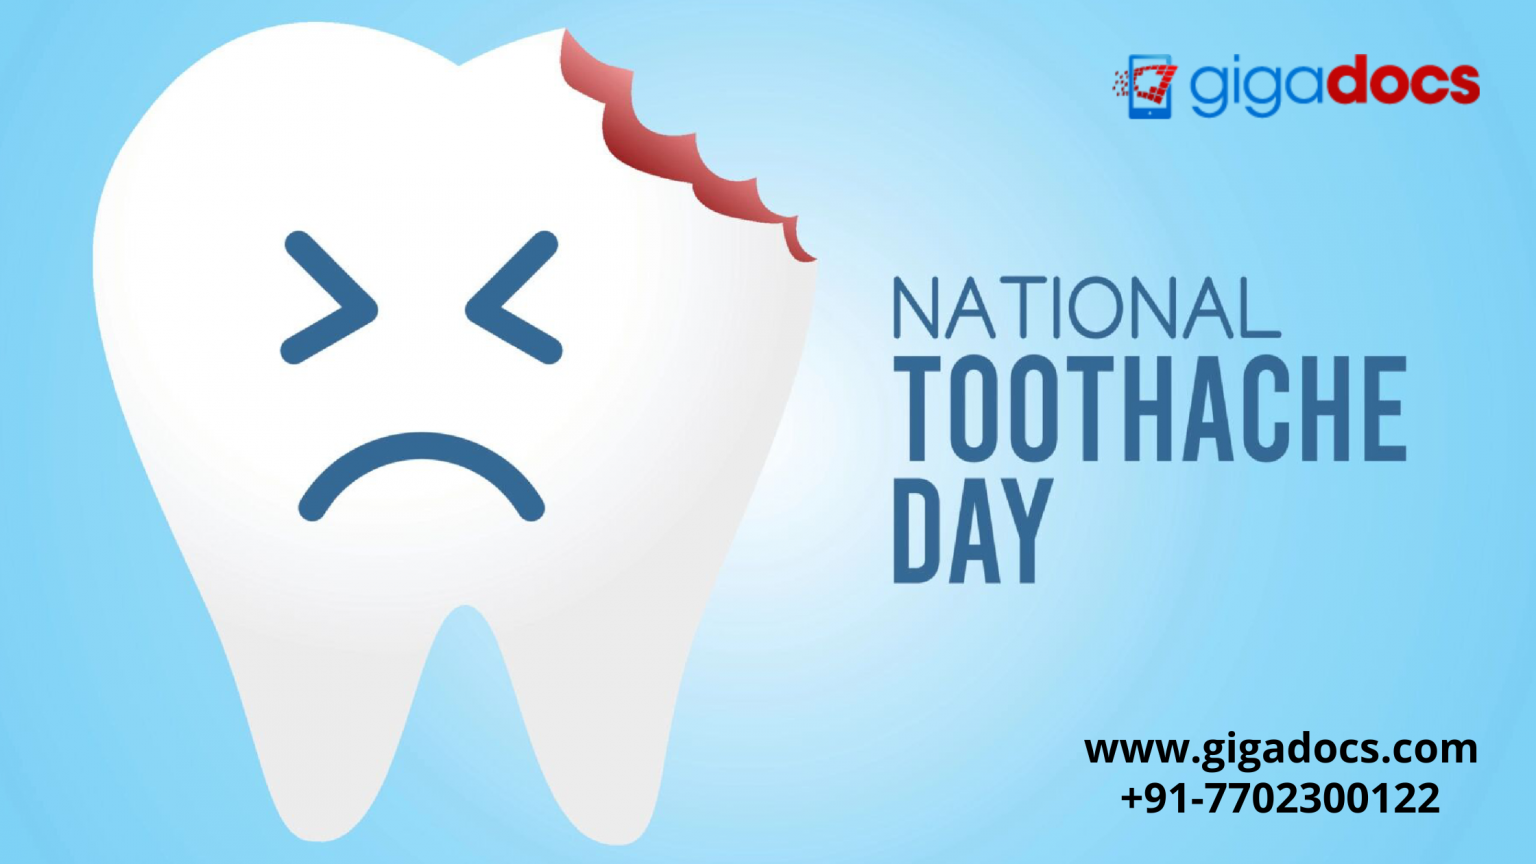 National Toothache Day Why shouldn't you ignore a toothache and miss a